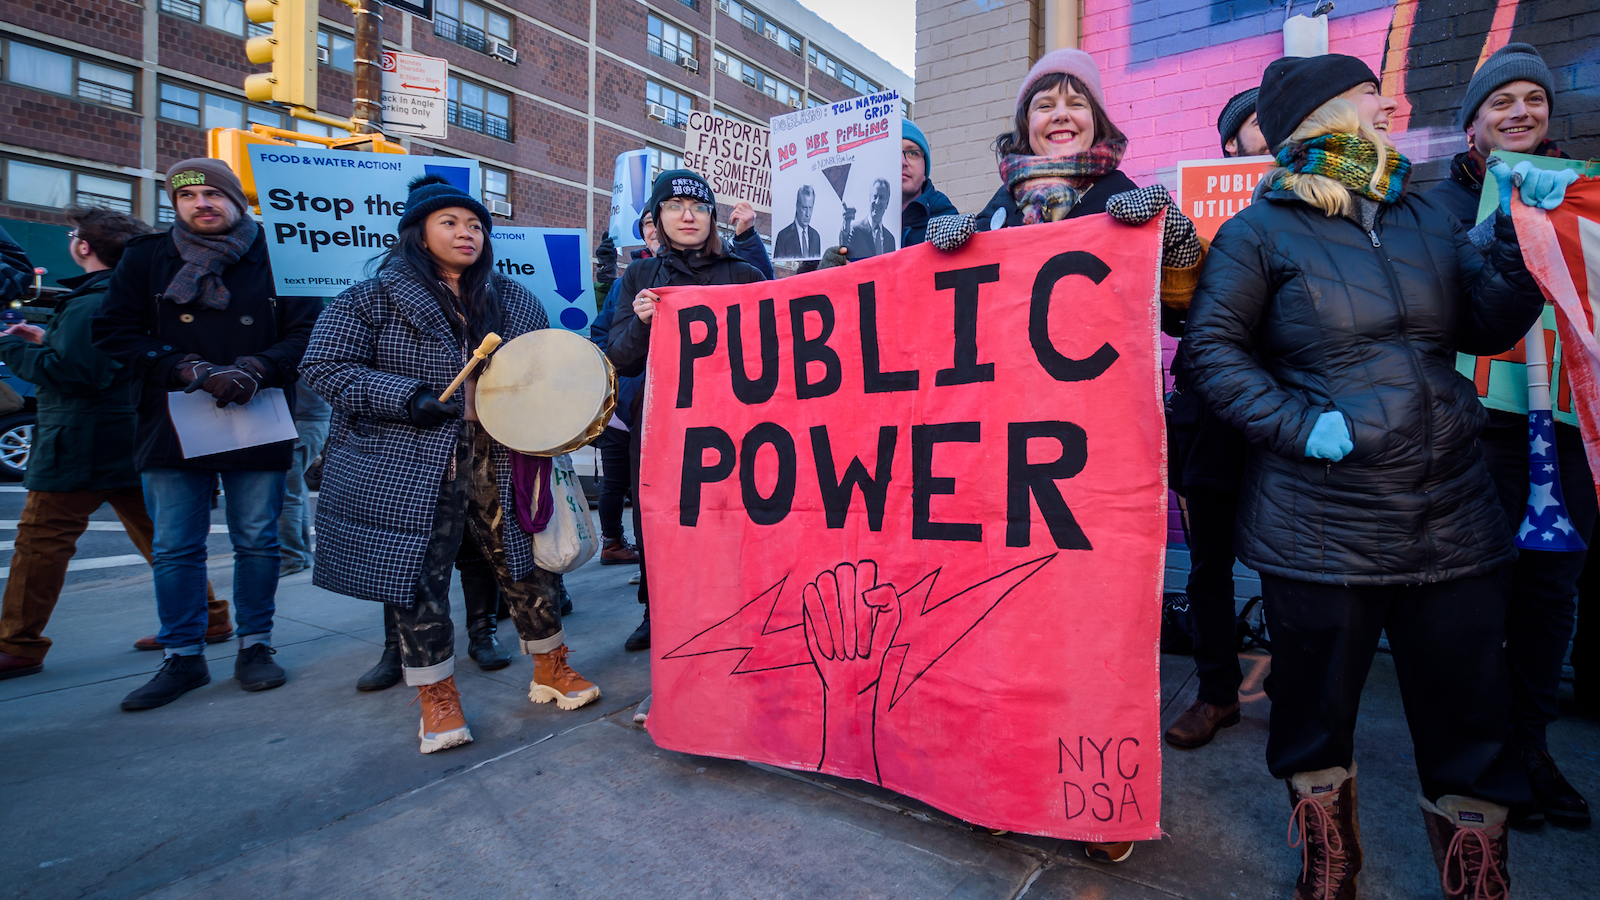 activists in new york hold a neon pink banner that says "Public Power"